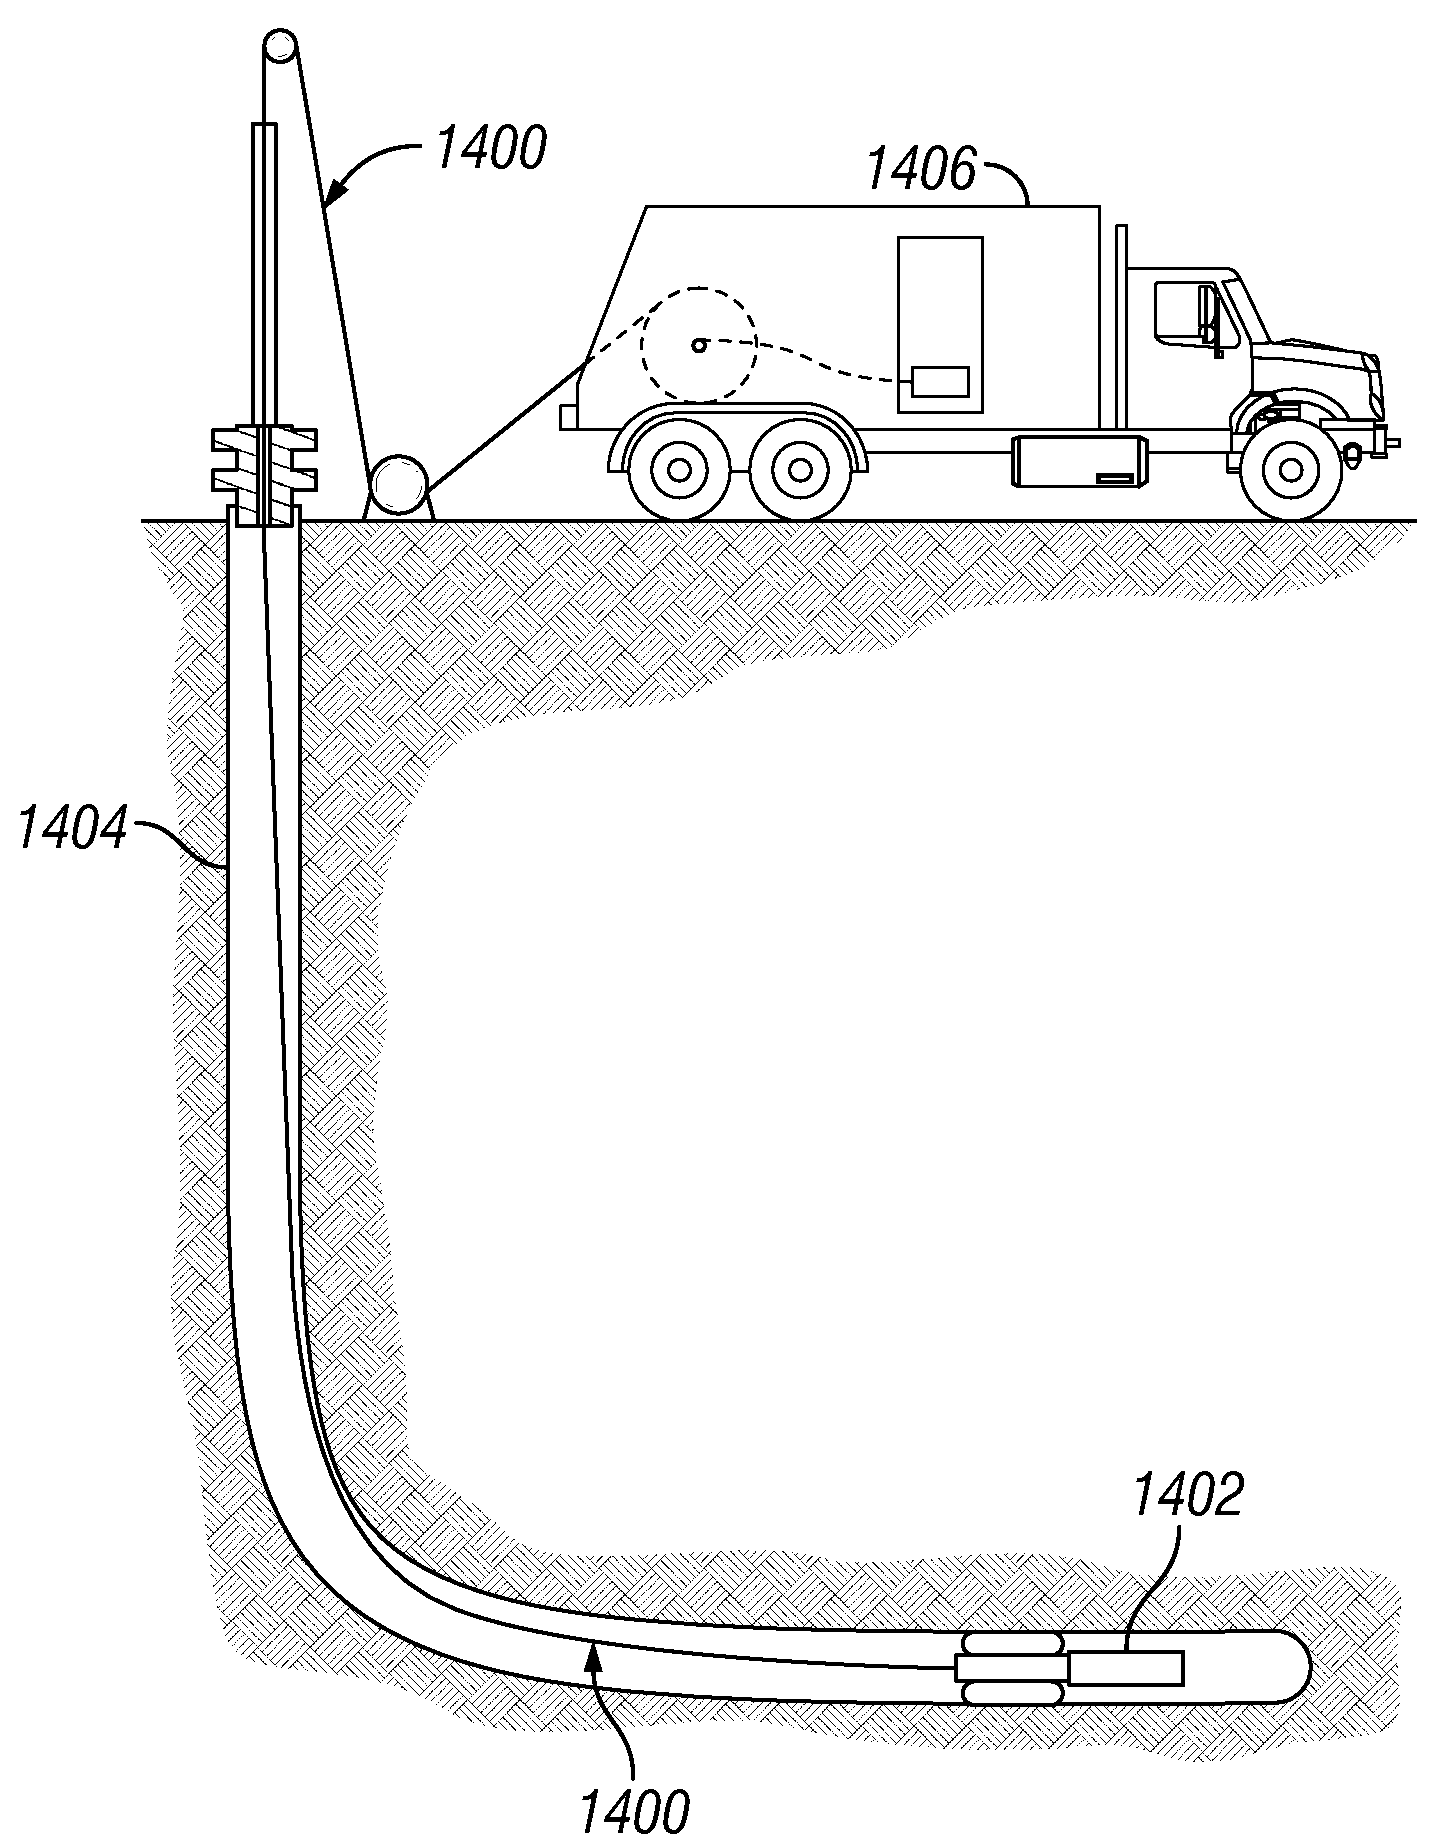 Methods of Using Enhanced Wellbore Electrical Cables